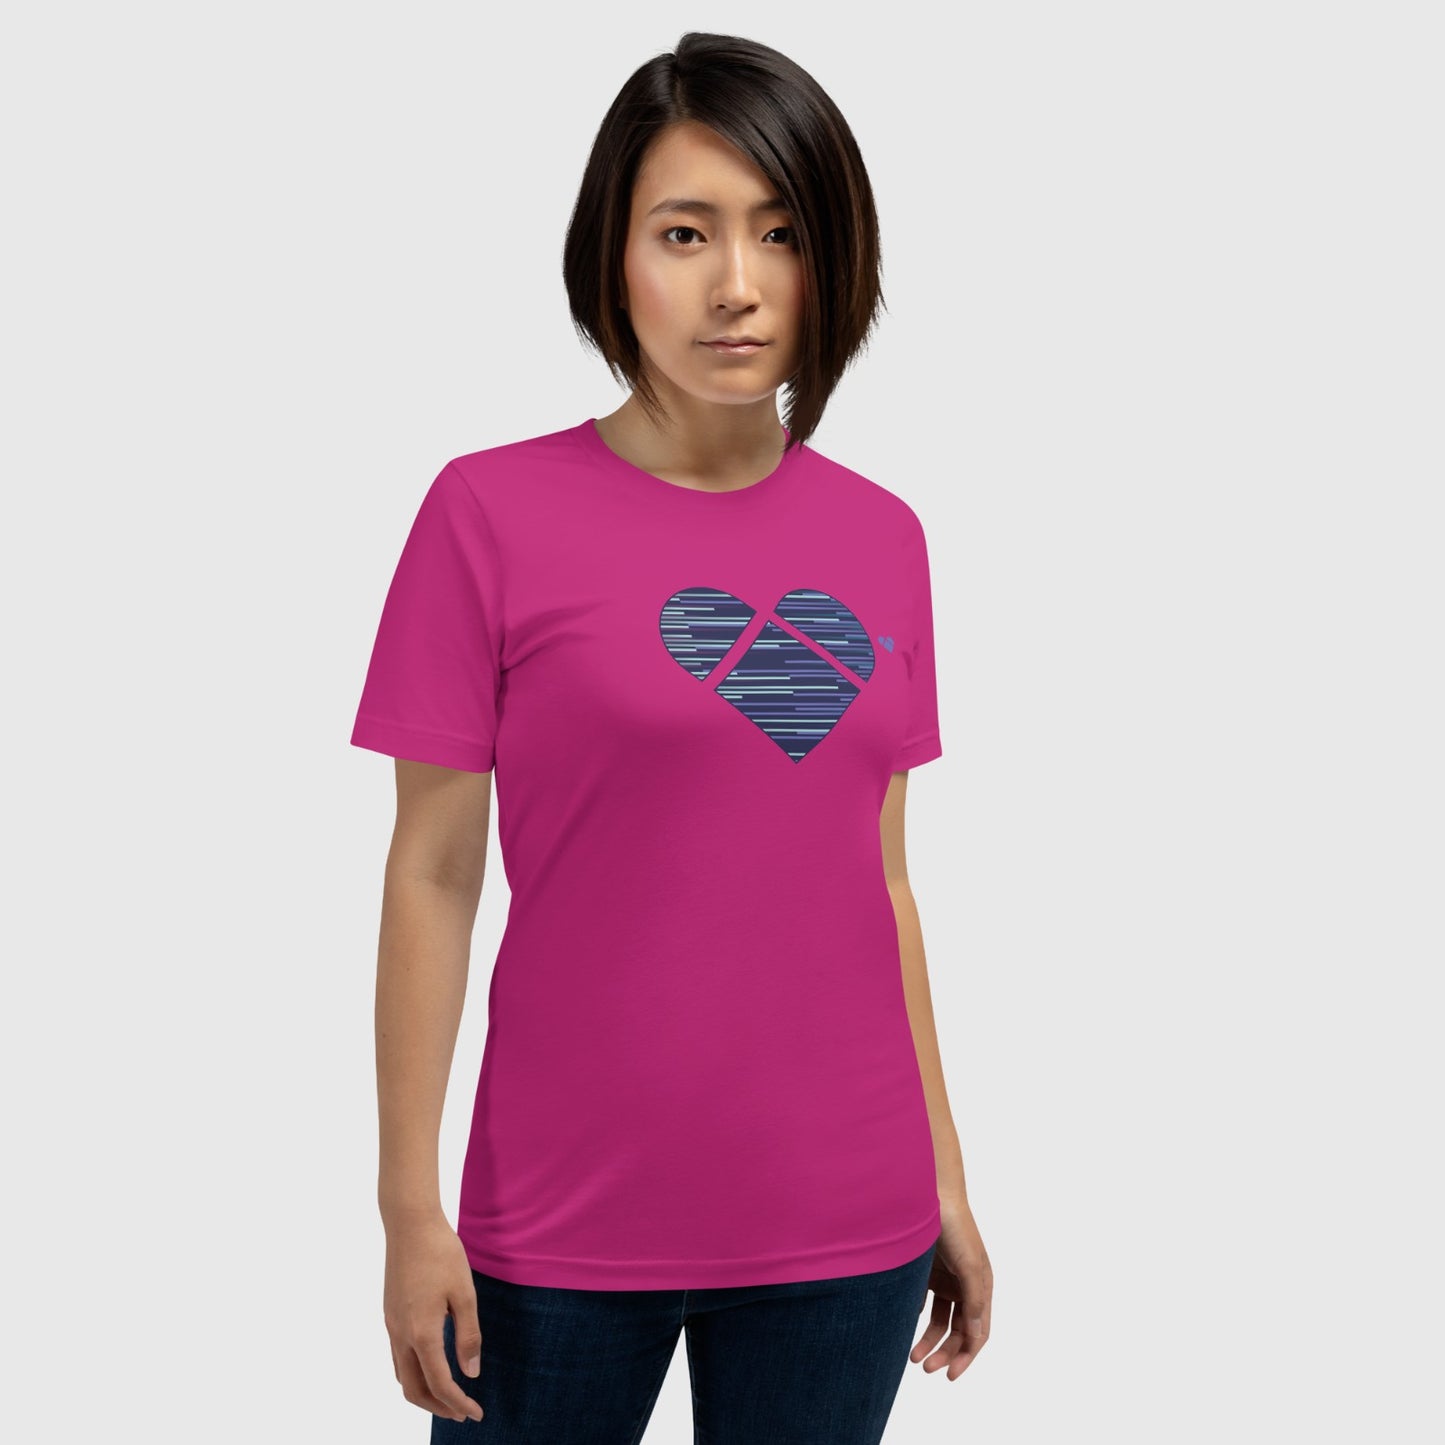 CRiZ AMOR's Fucsia Pink Tee: A Statement of Individuality